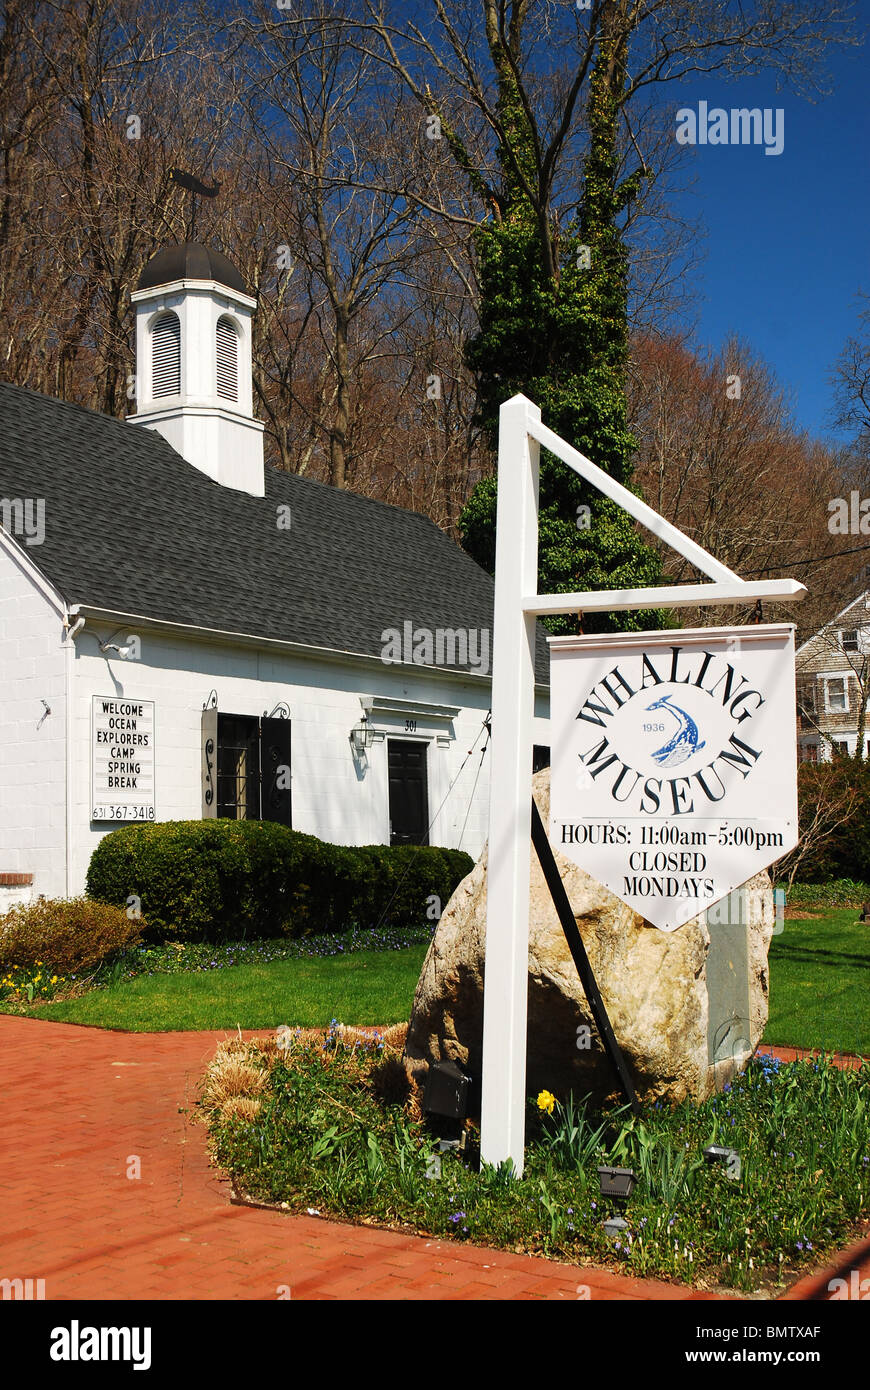 Whaling Museum Cold Spring Harbor, Long Island, New York Stockfoto